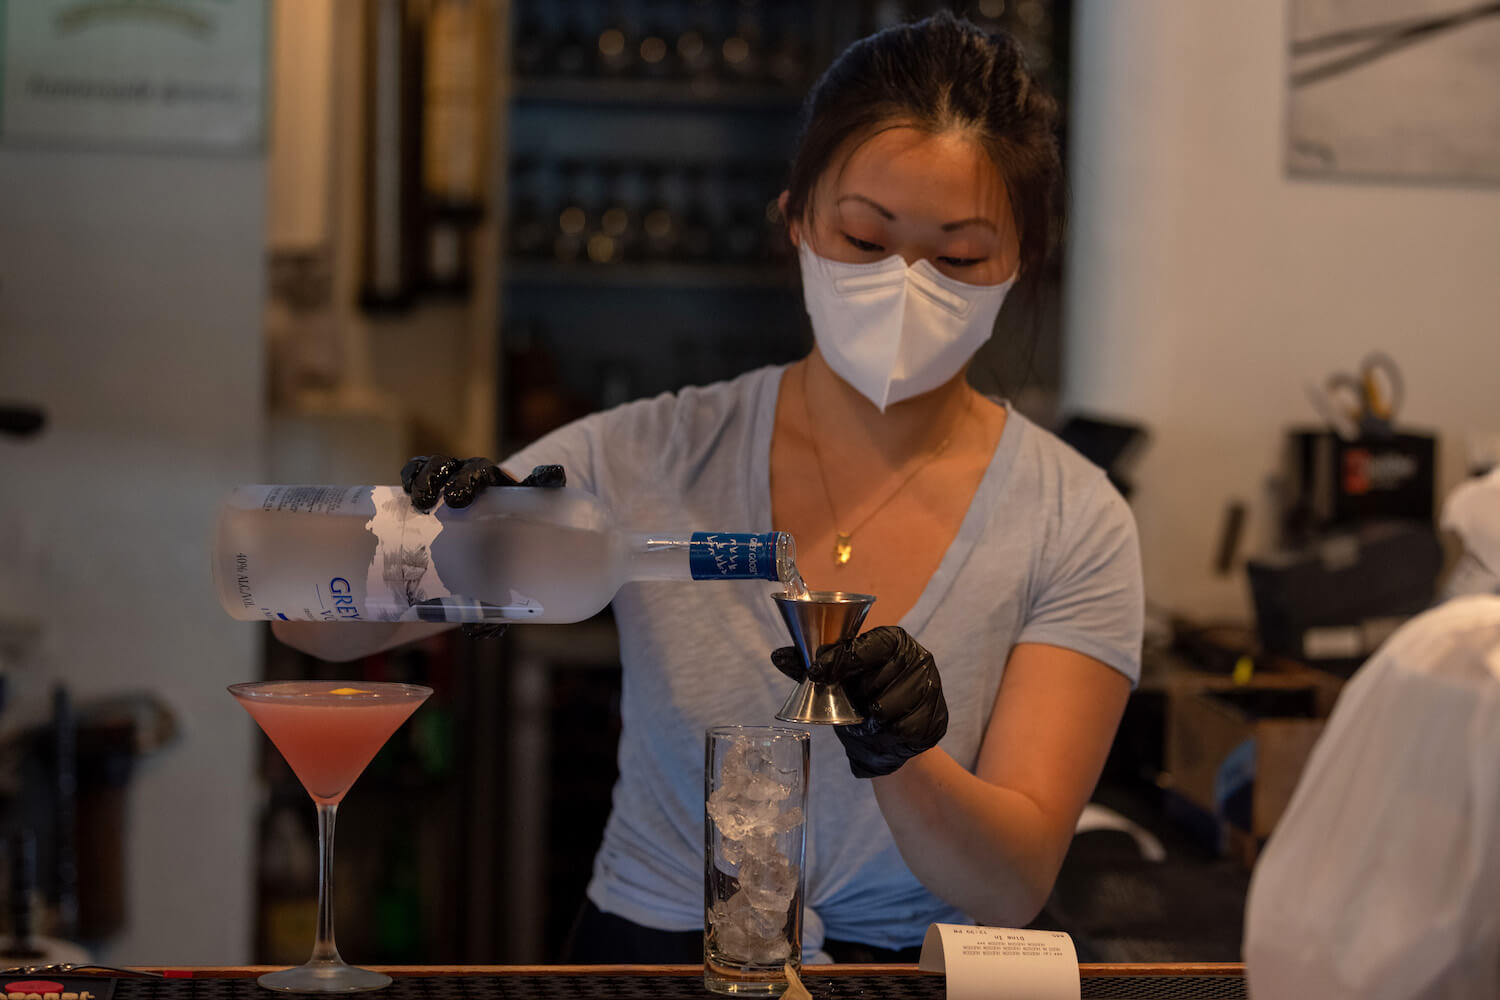 The manager wearing a mask prepares a cocktail at Westville Hudson as the city continues Phase 4 of re-opening following restrictions imposed to slow the spread of coronavirus on September 30, 2020 in New York City. July 2021